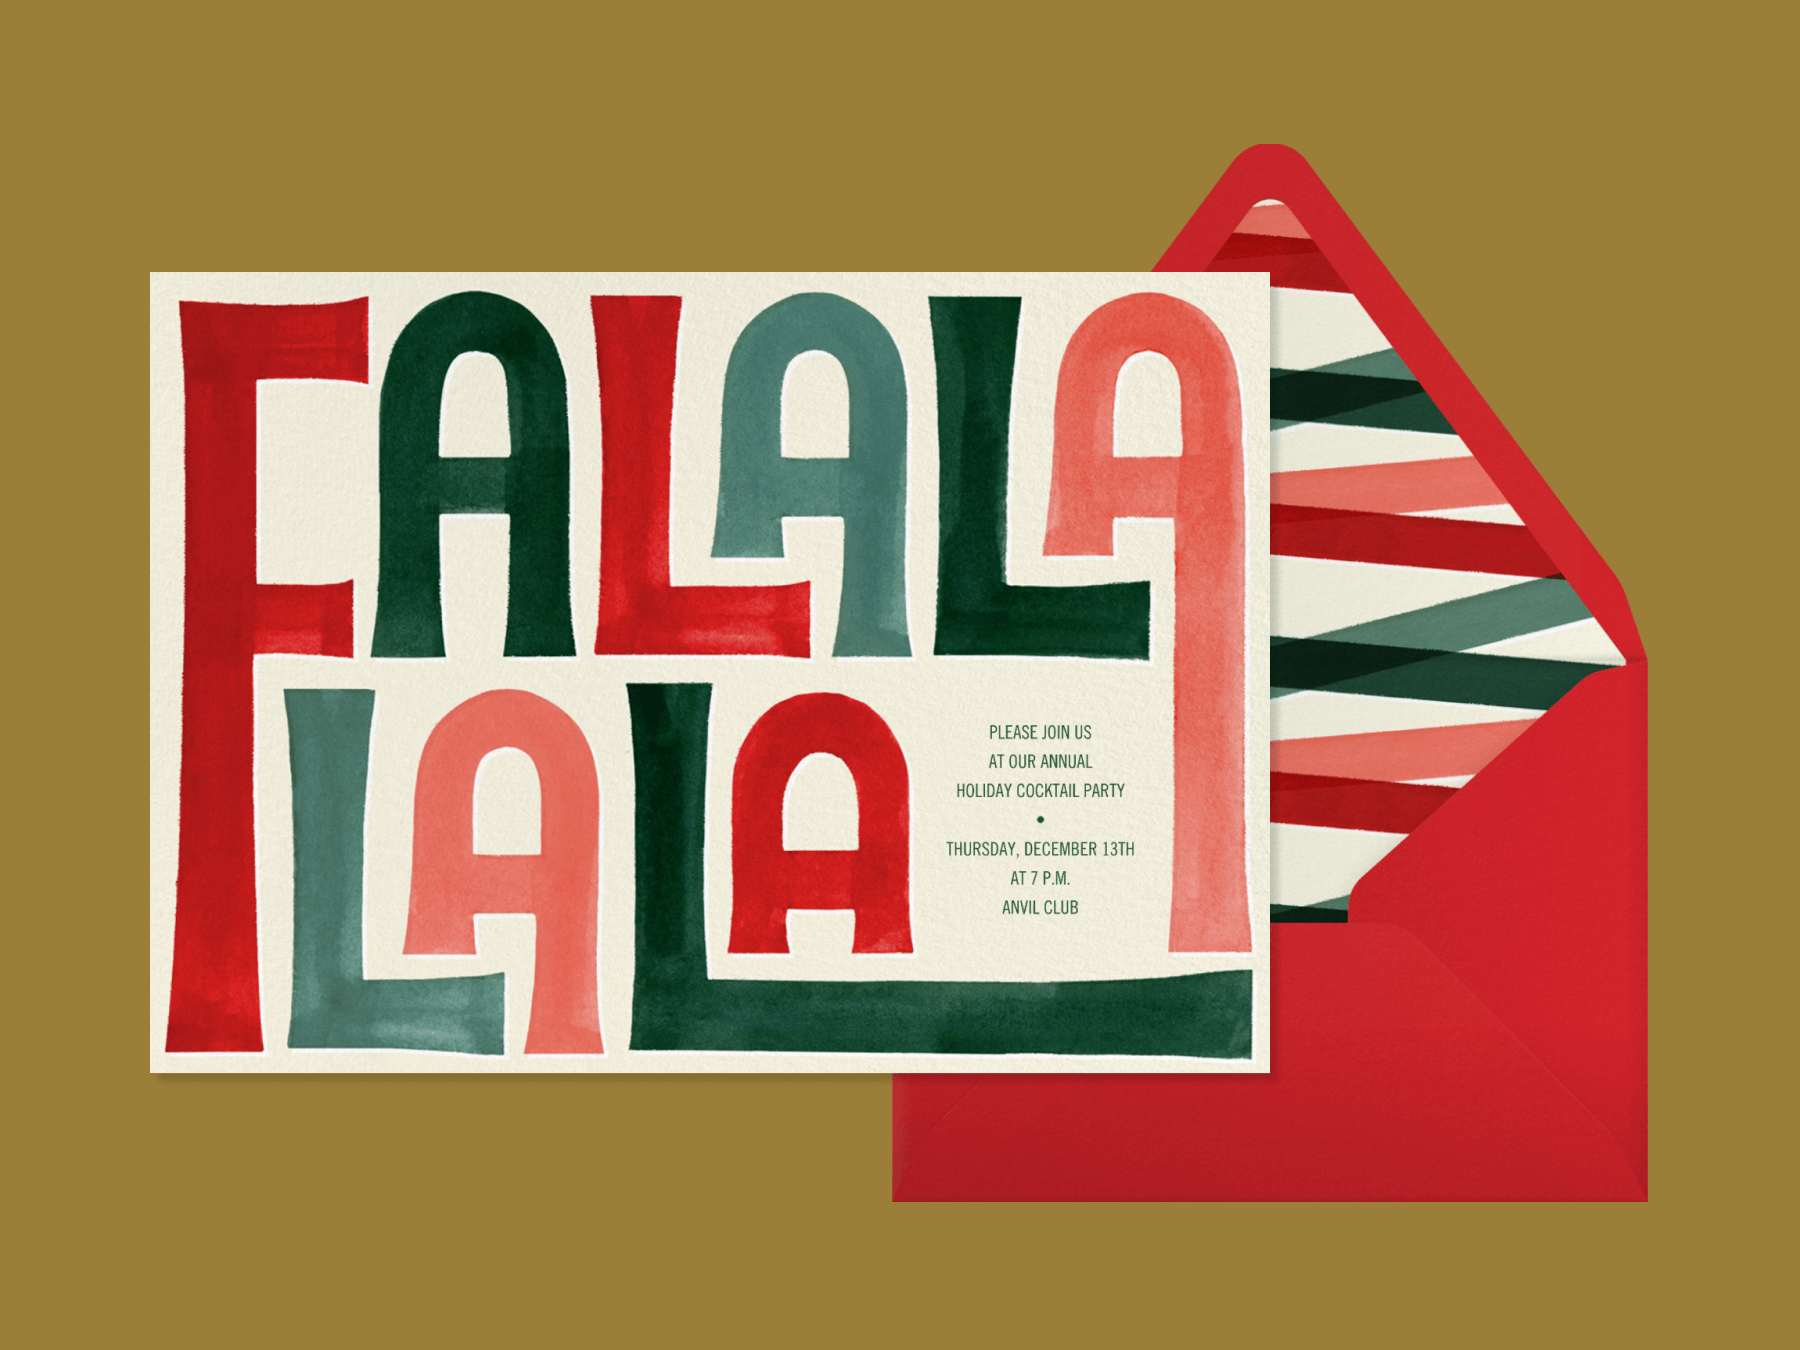 A holiday party with the word “FALALALALA” written large in red and green.